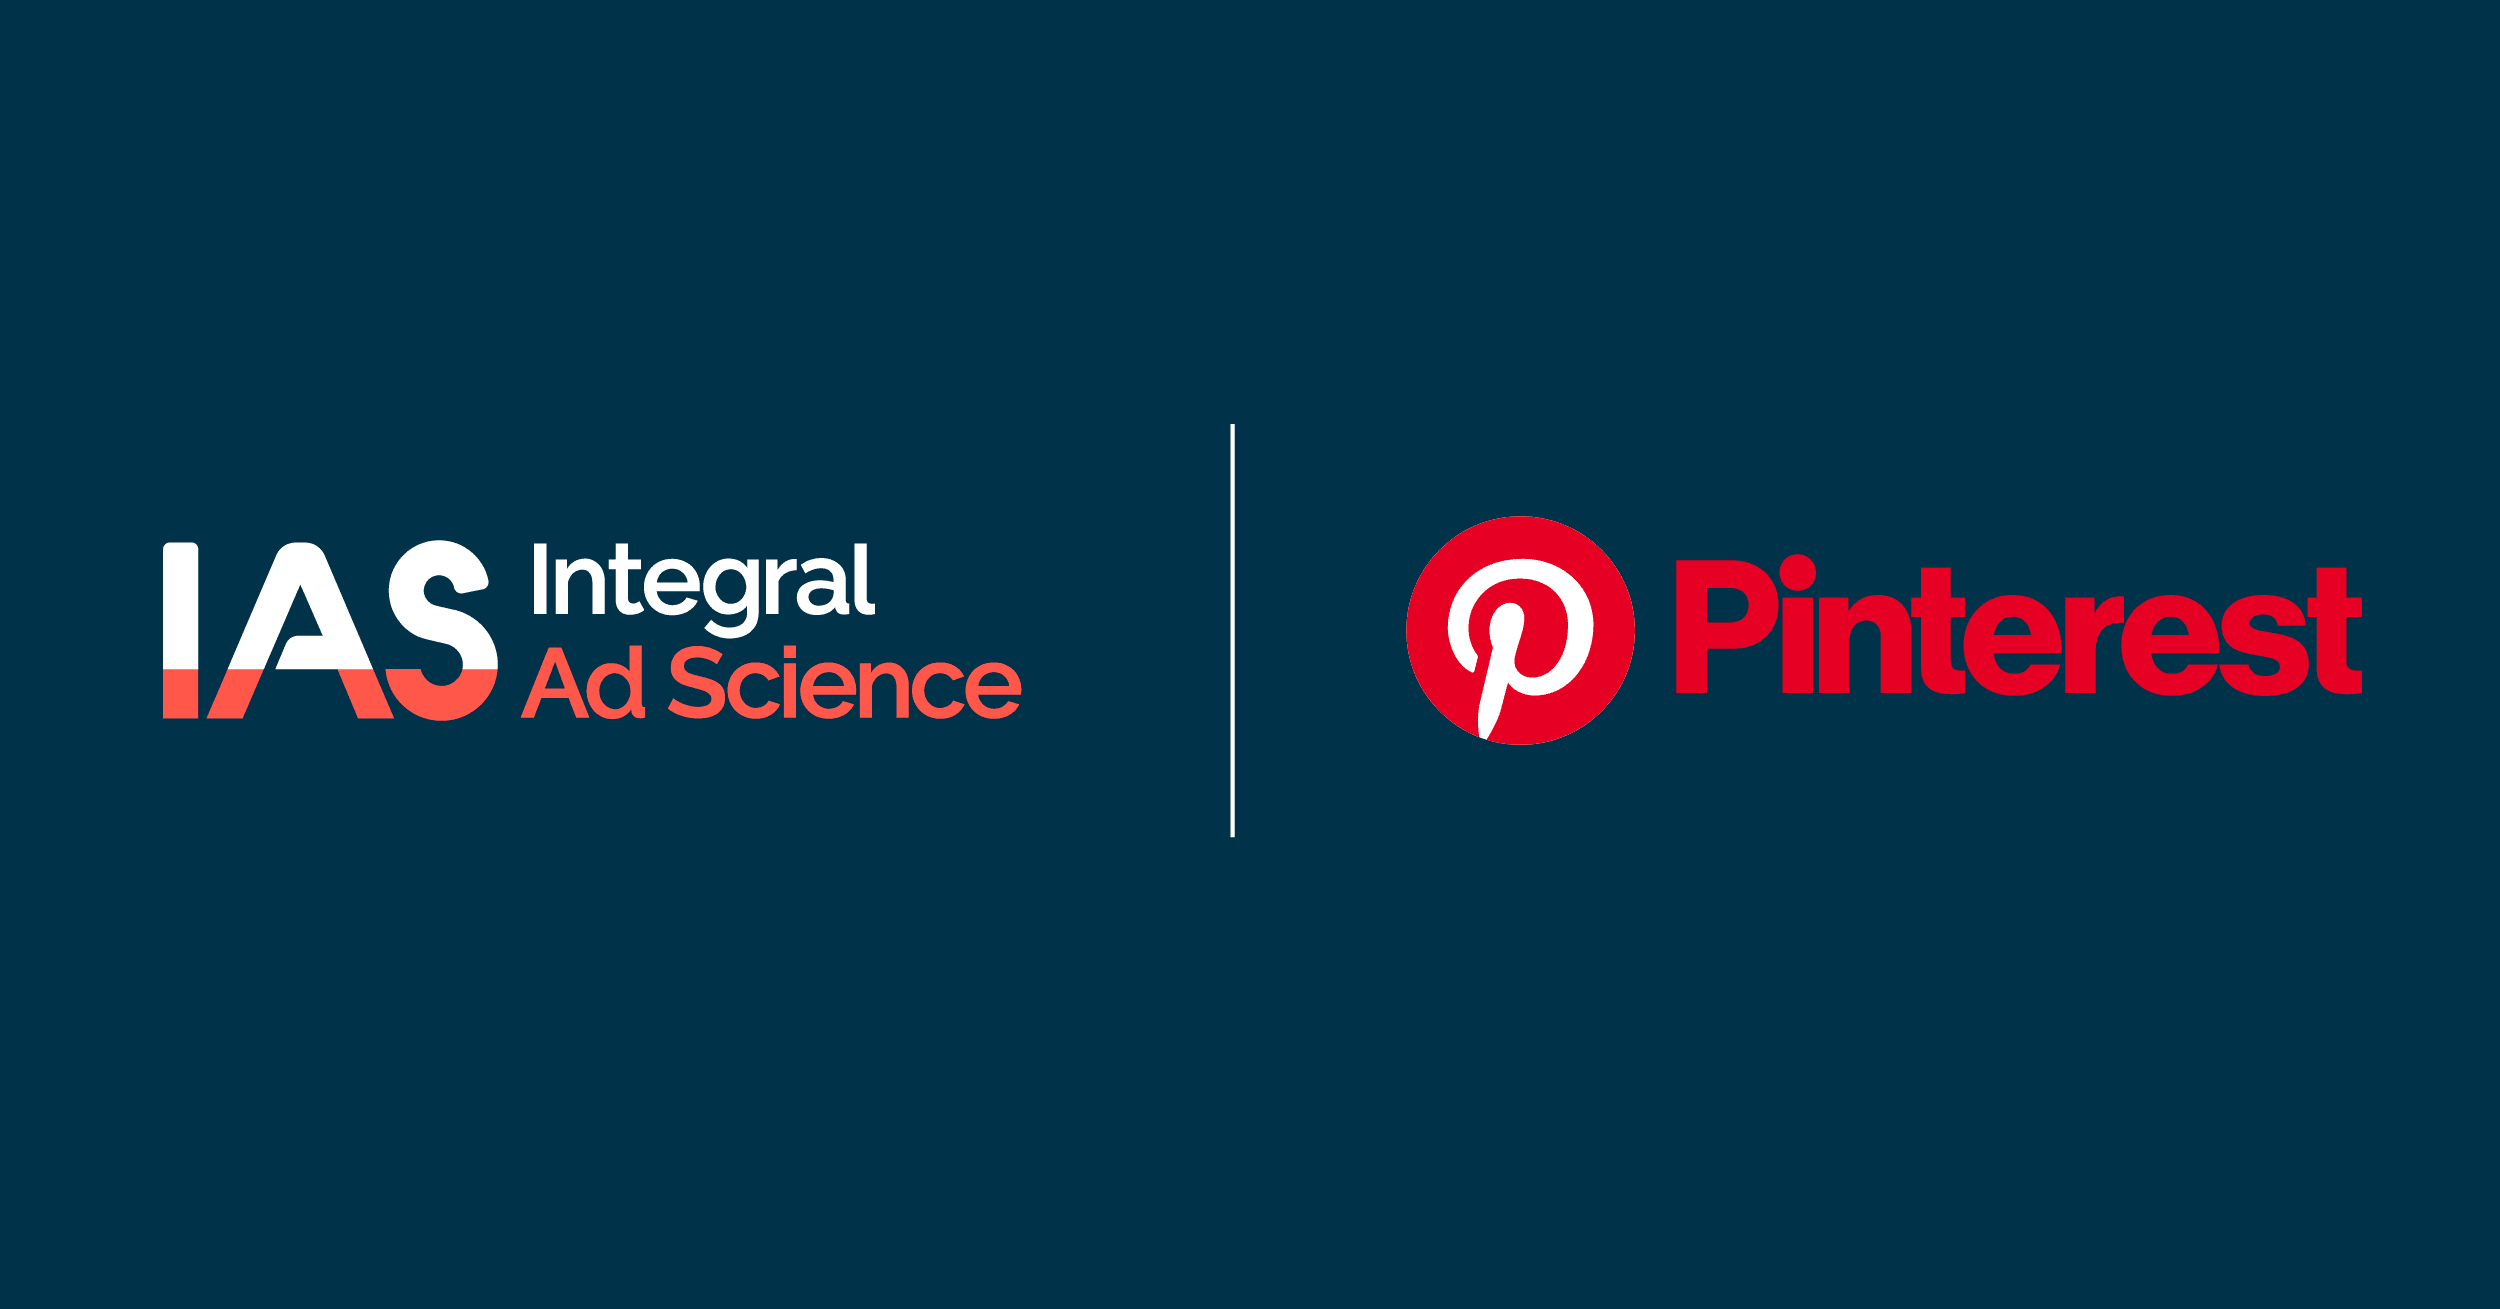 IAS Now Offers Fraud and Viewability Measurement Across Pinterest